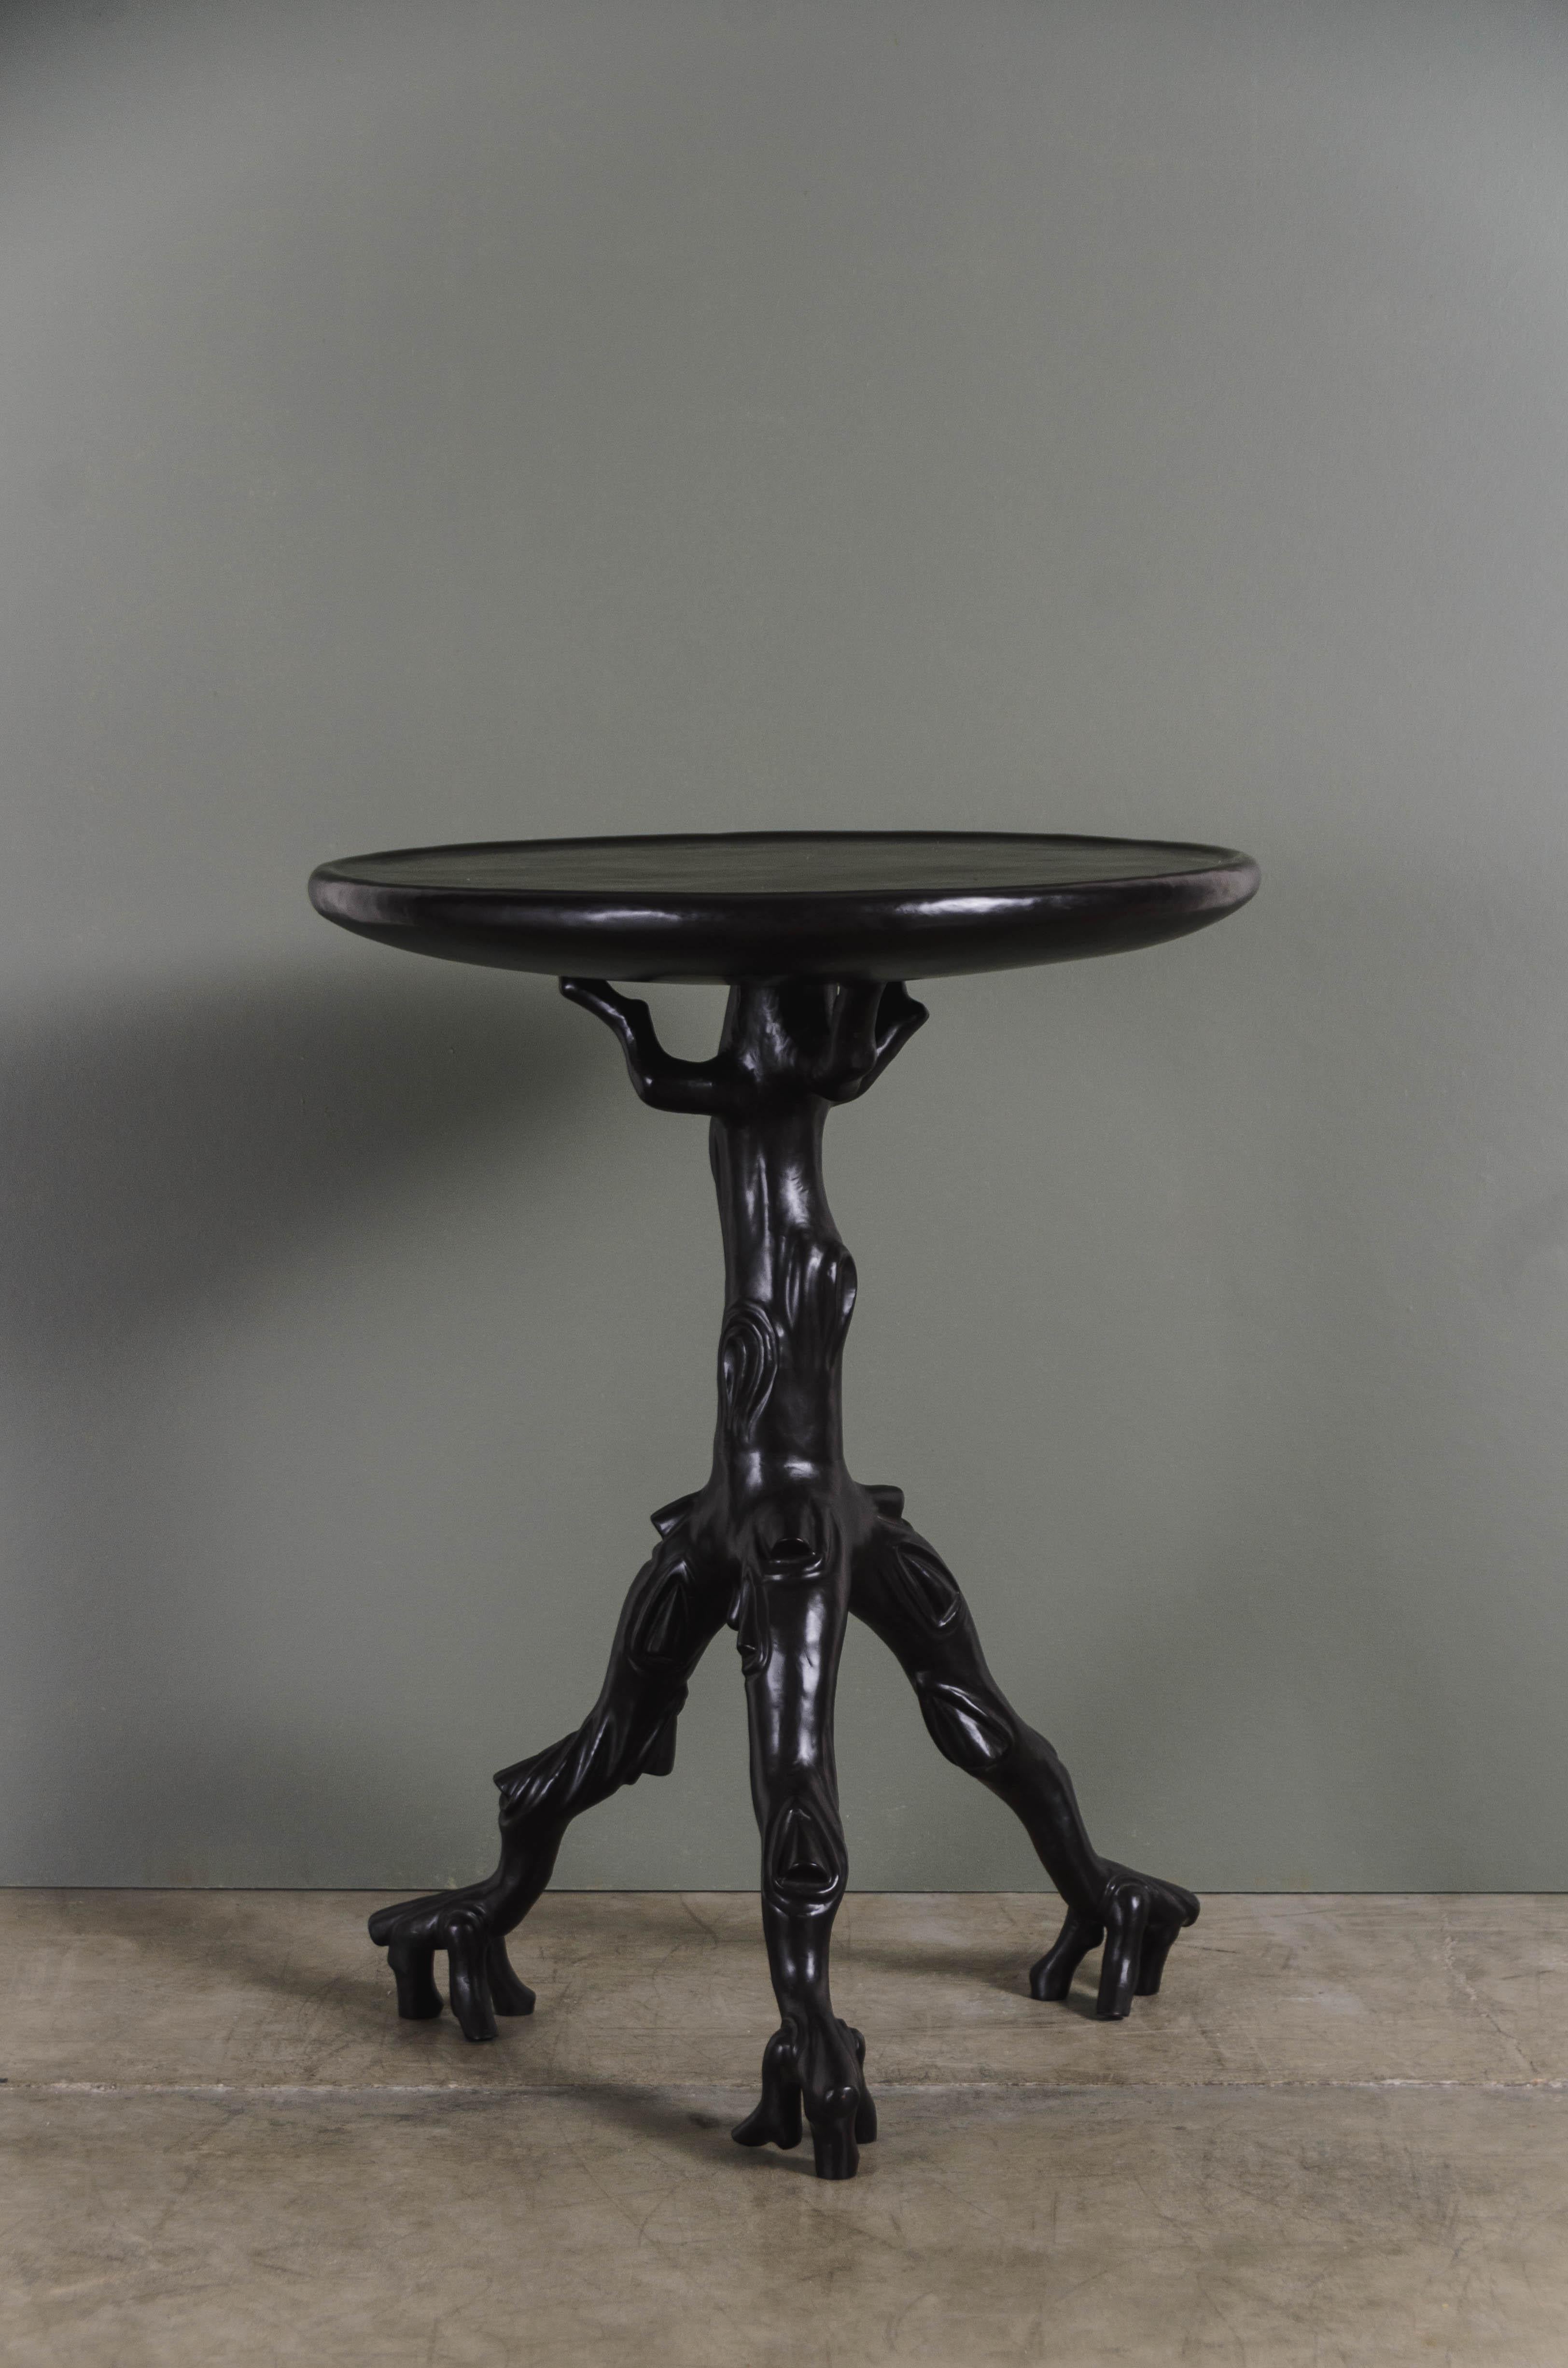 Twig table
Black copper finish
Hand repoussé
Limited edition
Each piece is individually crafted and is unique. 
Repoussé is the traditional art of hand-hammering decorative relief onto sheet metal. The technique originated around 800 BC between